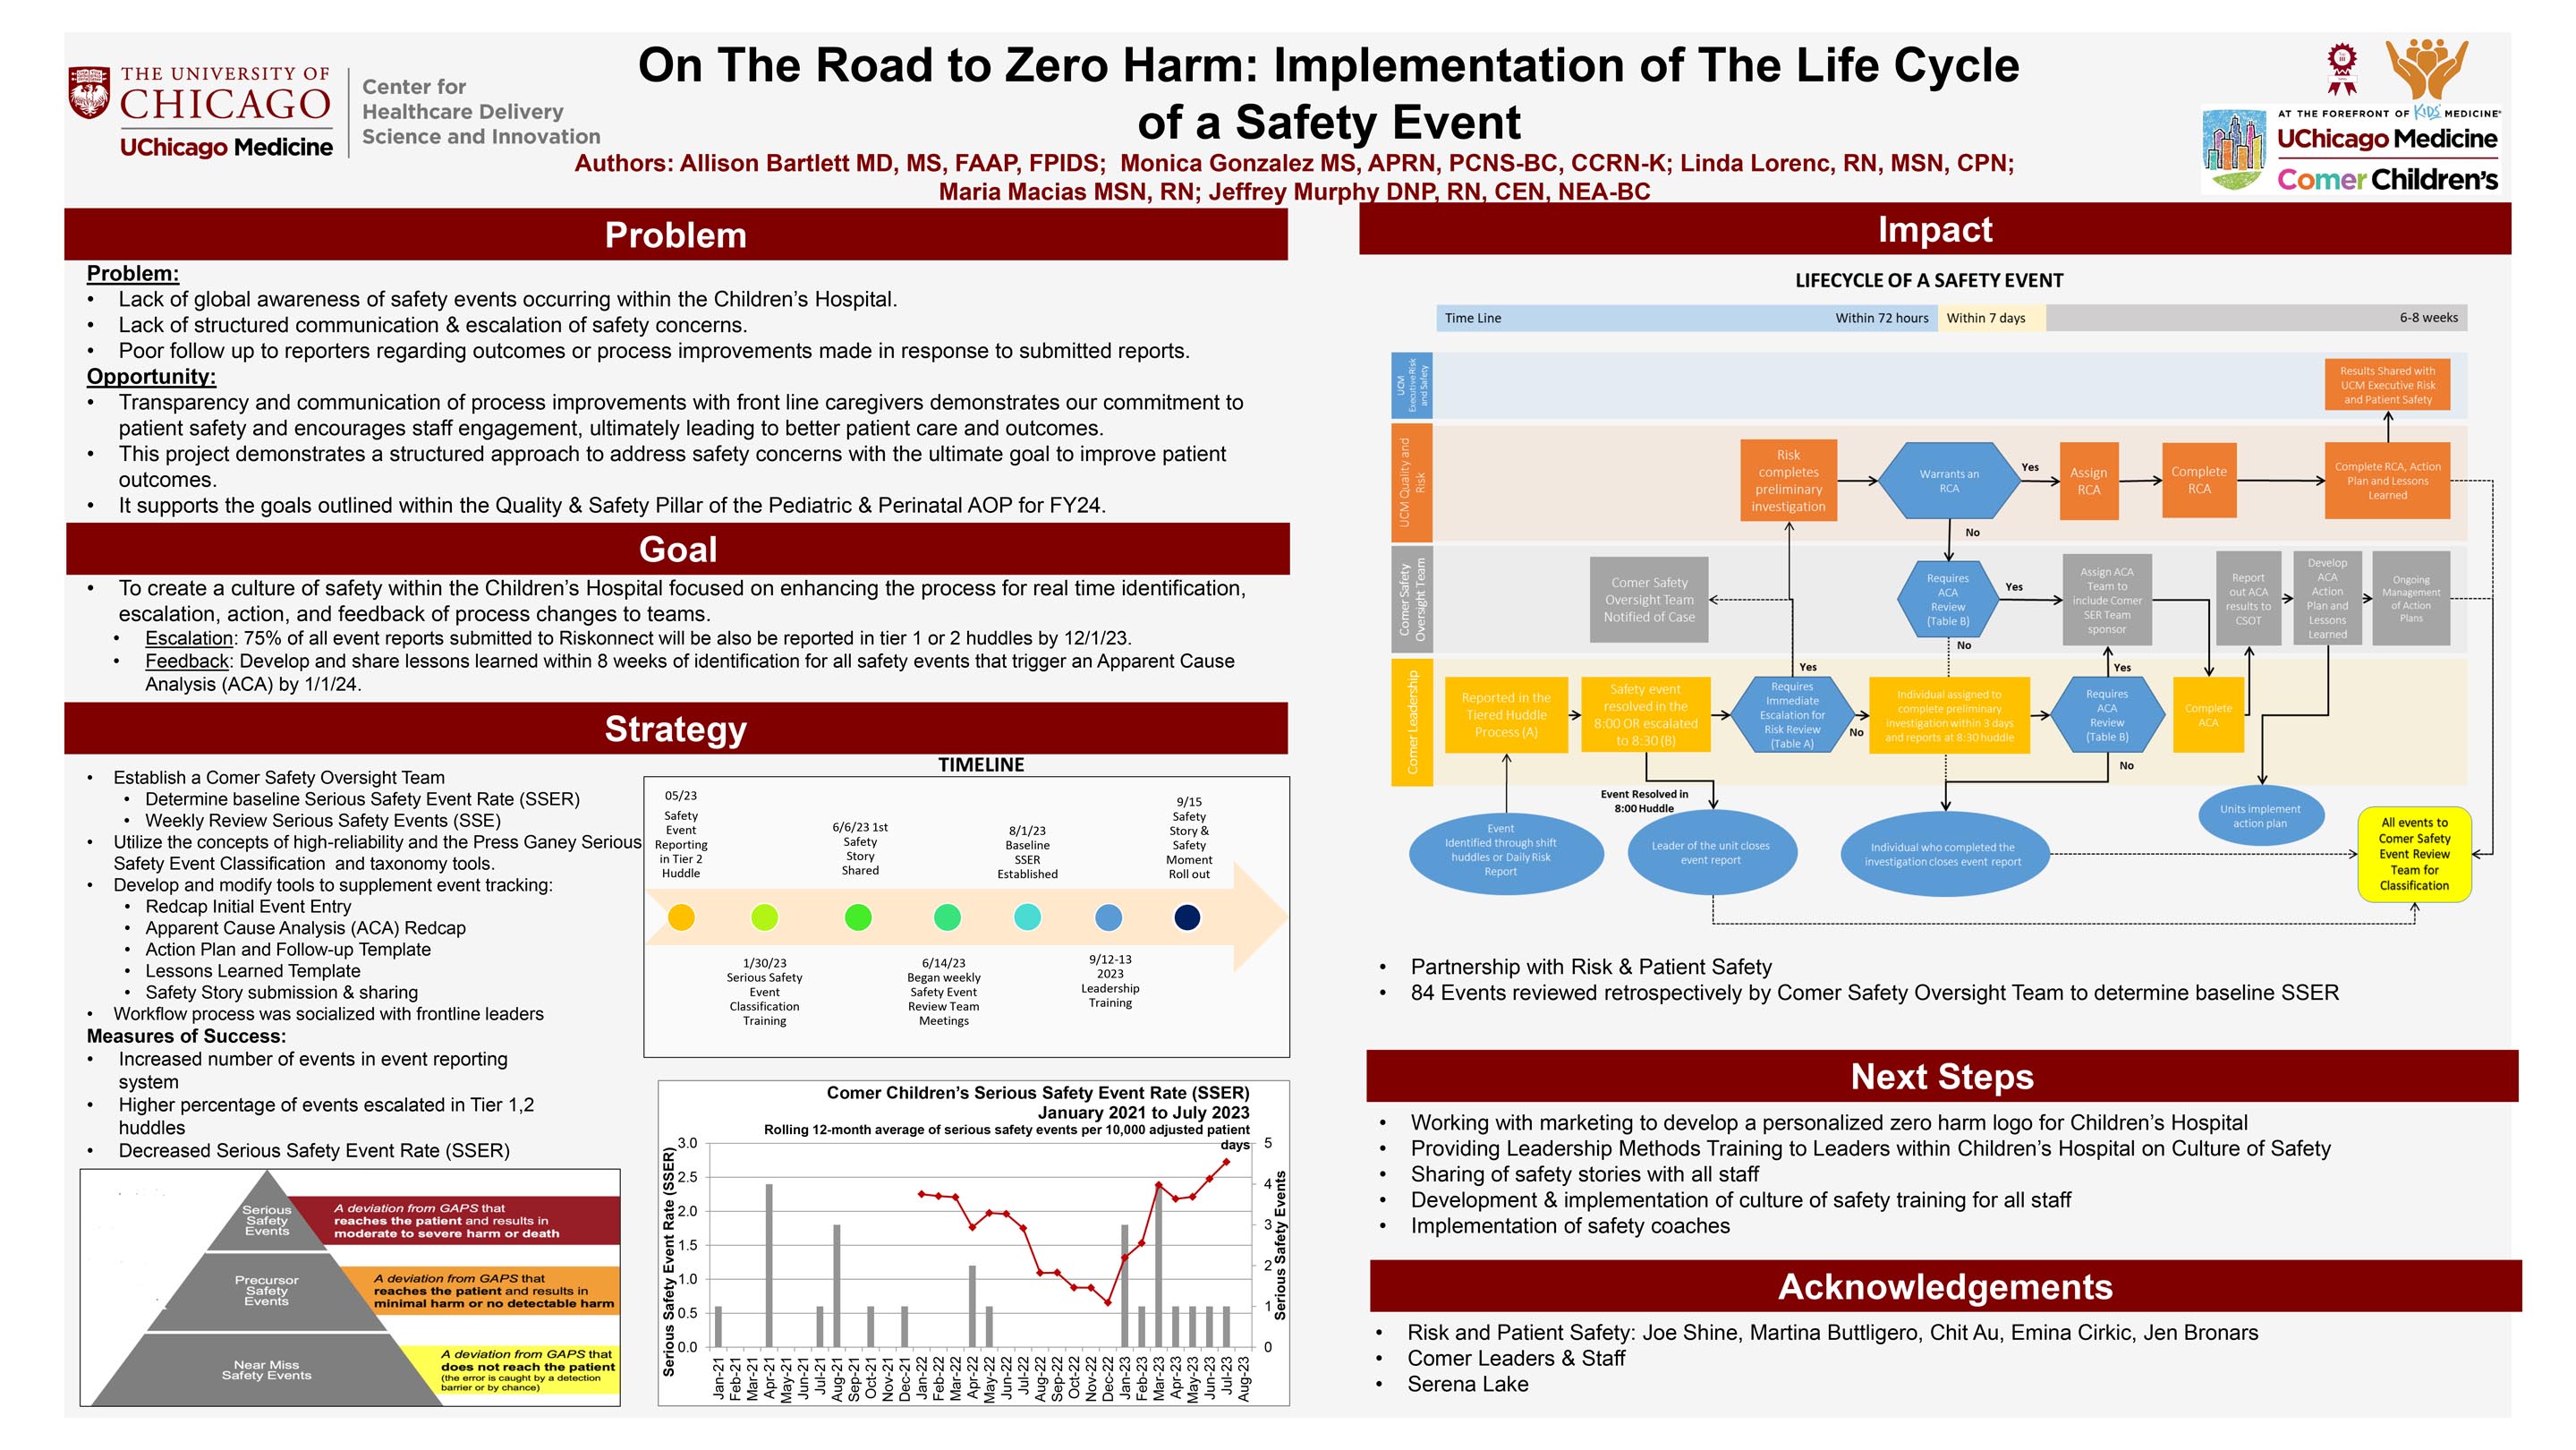 GONZALEZ_On The Road to Zero Harm- Implementation of the Life Cycle of a Safety Event